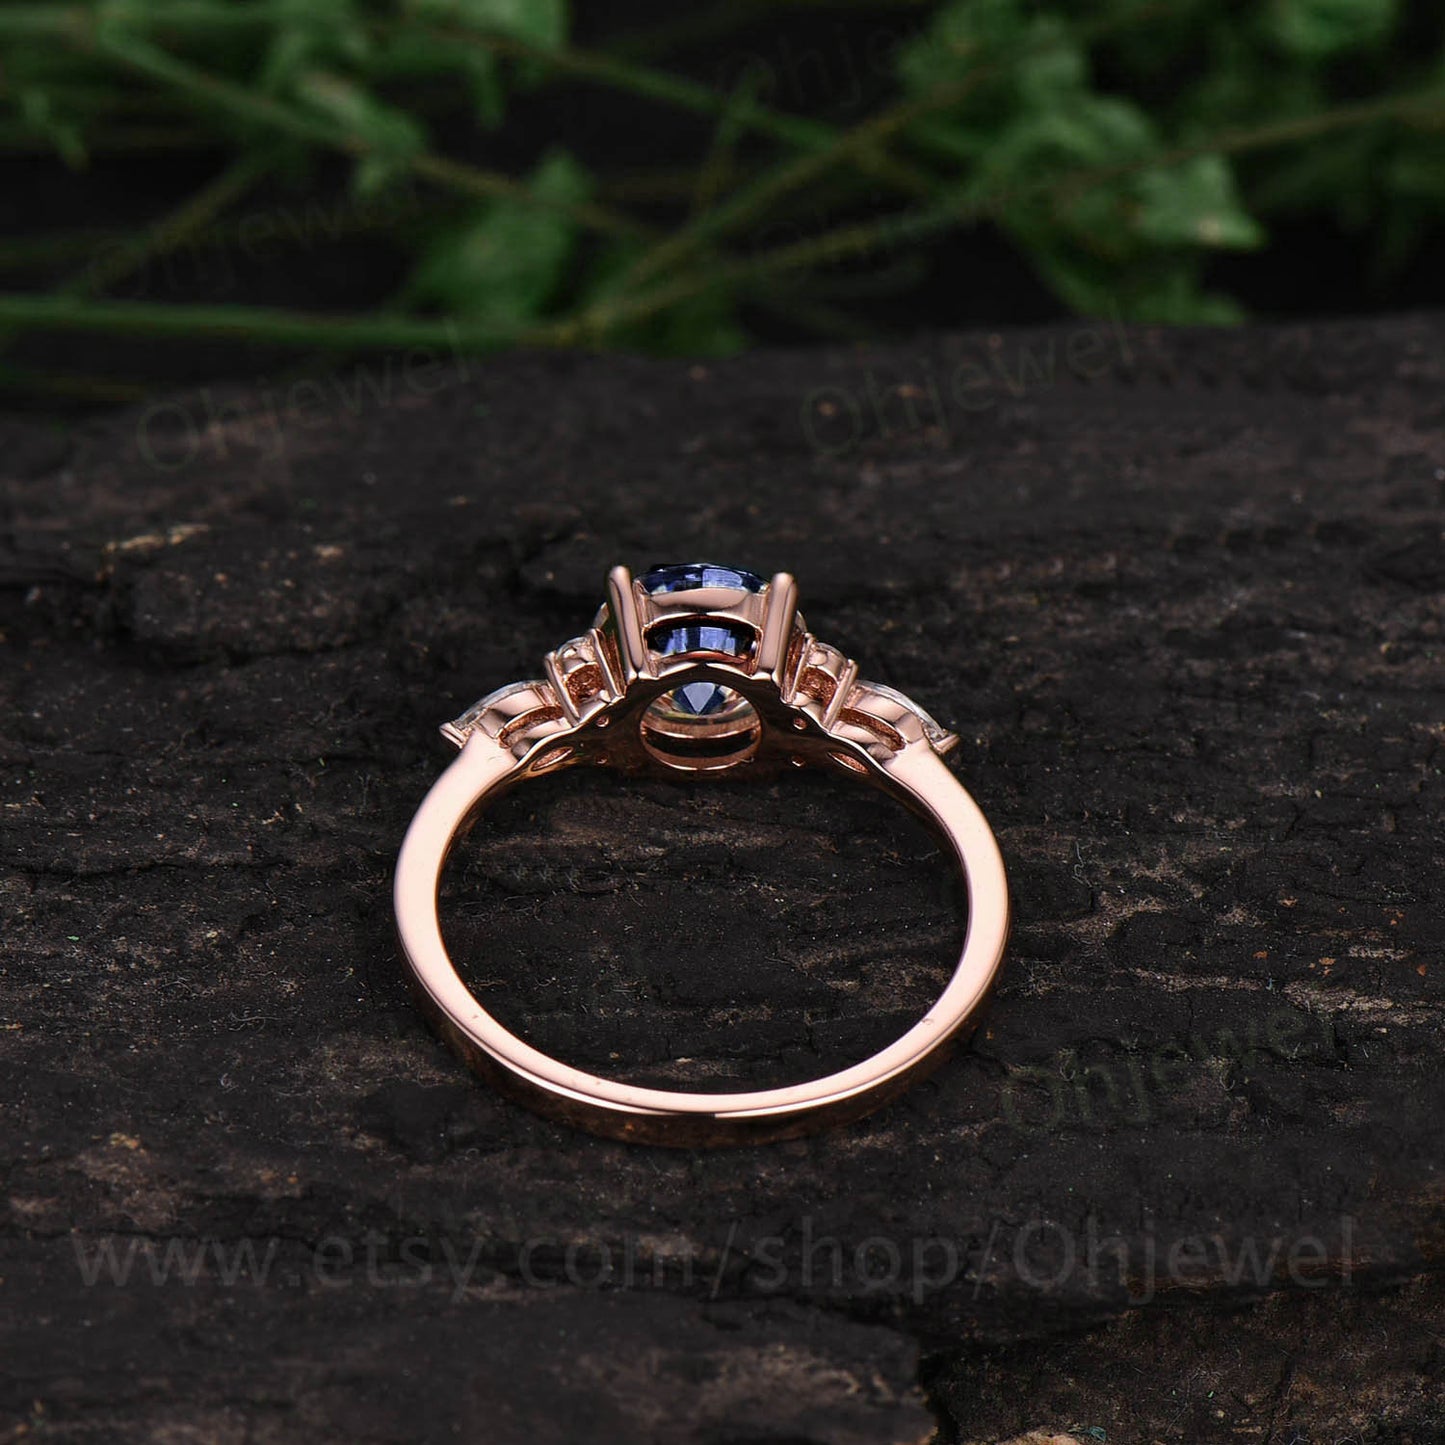 7mm round sapphire ring for women unique vintage sapphire engagement ring rose gold sapphire jewelry art deco moissanite ring wedding gift